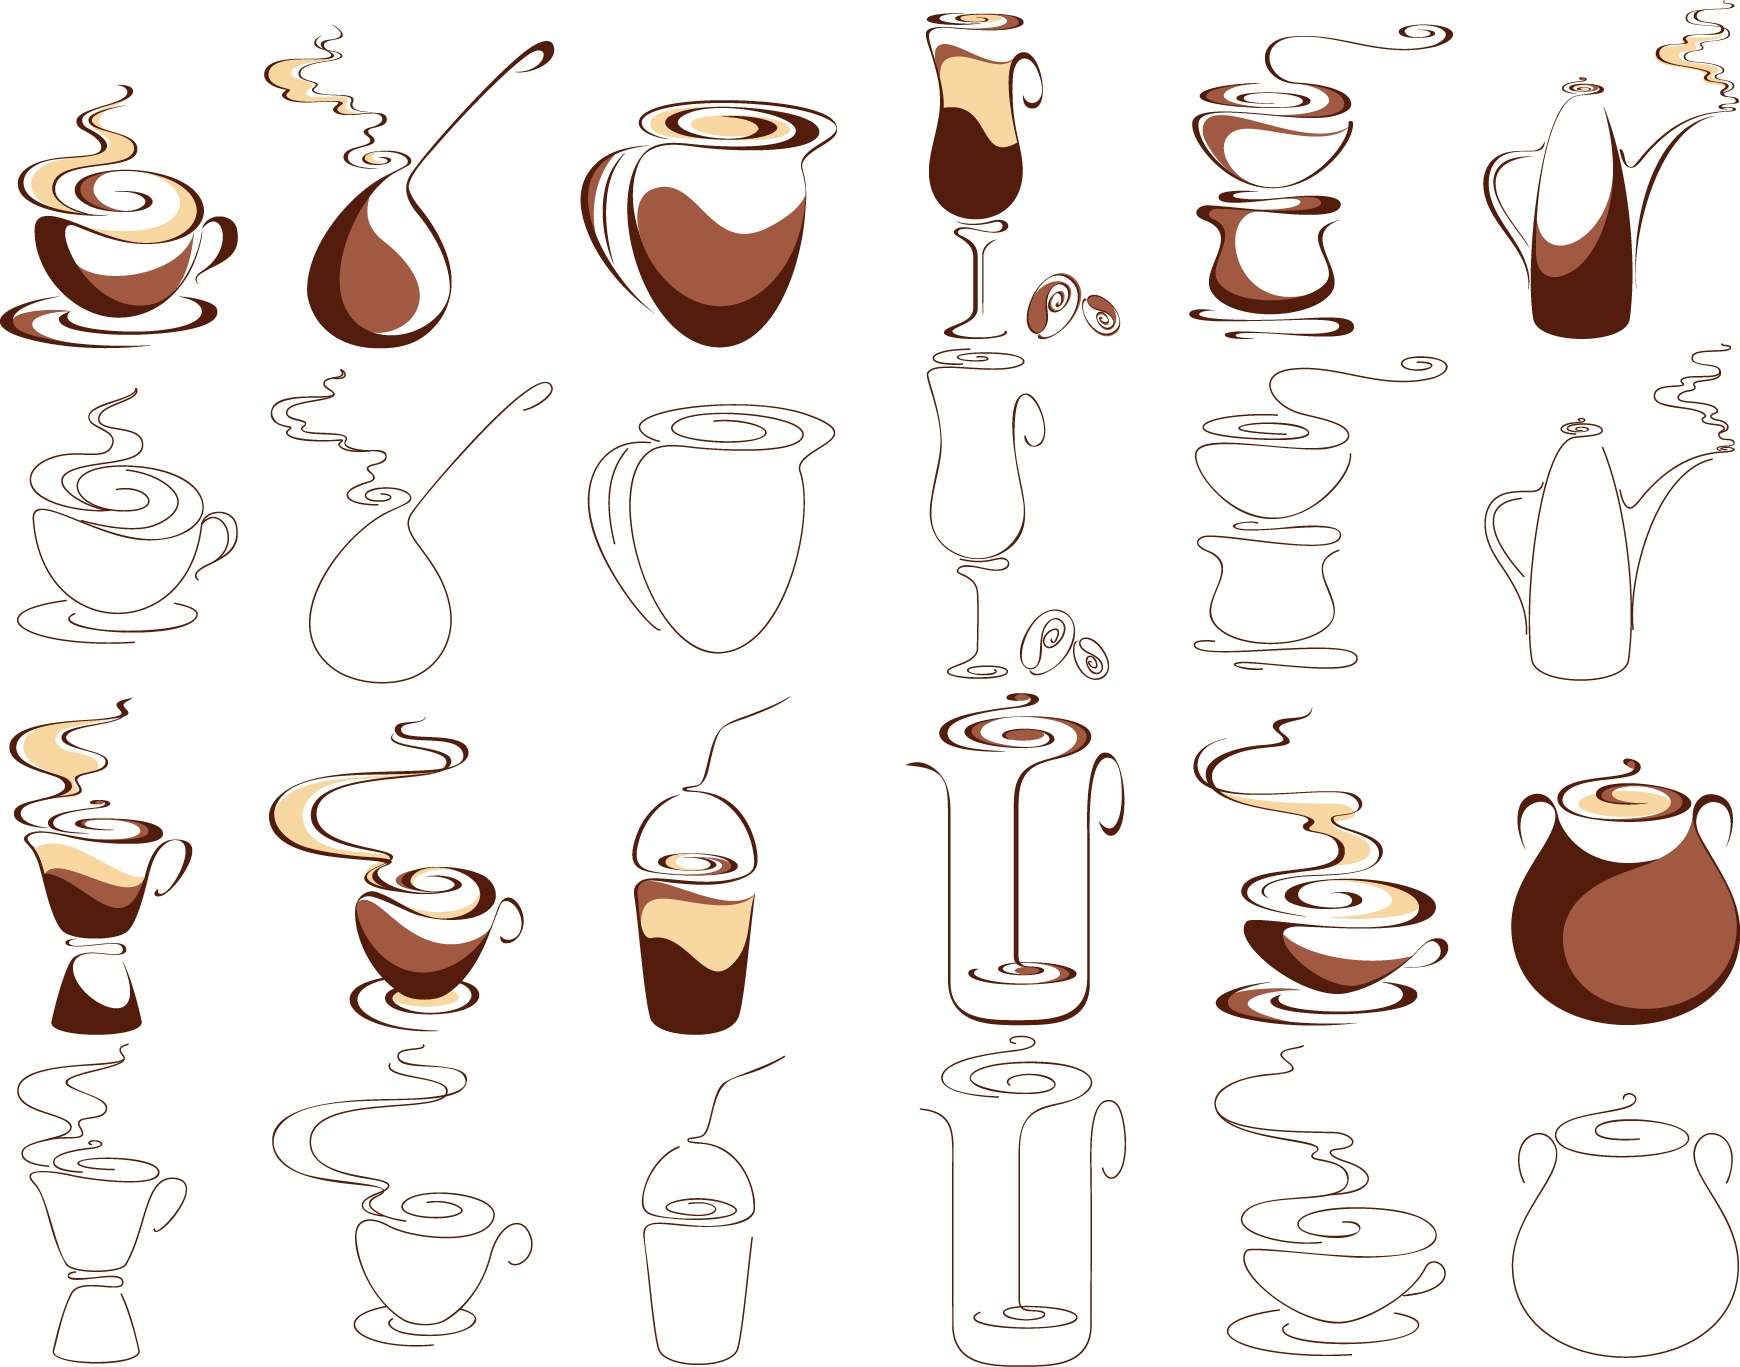 Coffee graphic